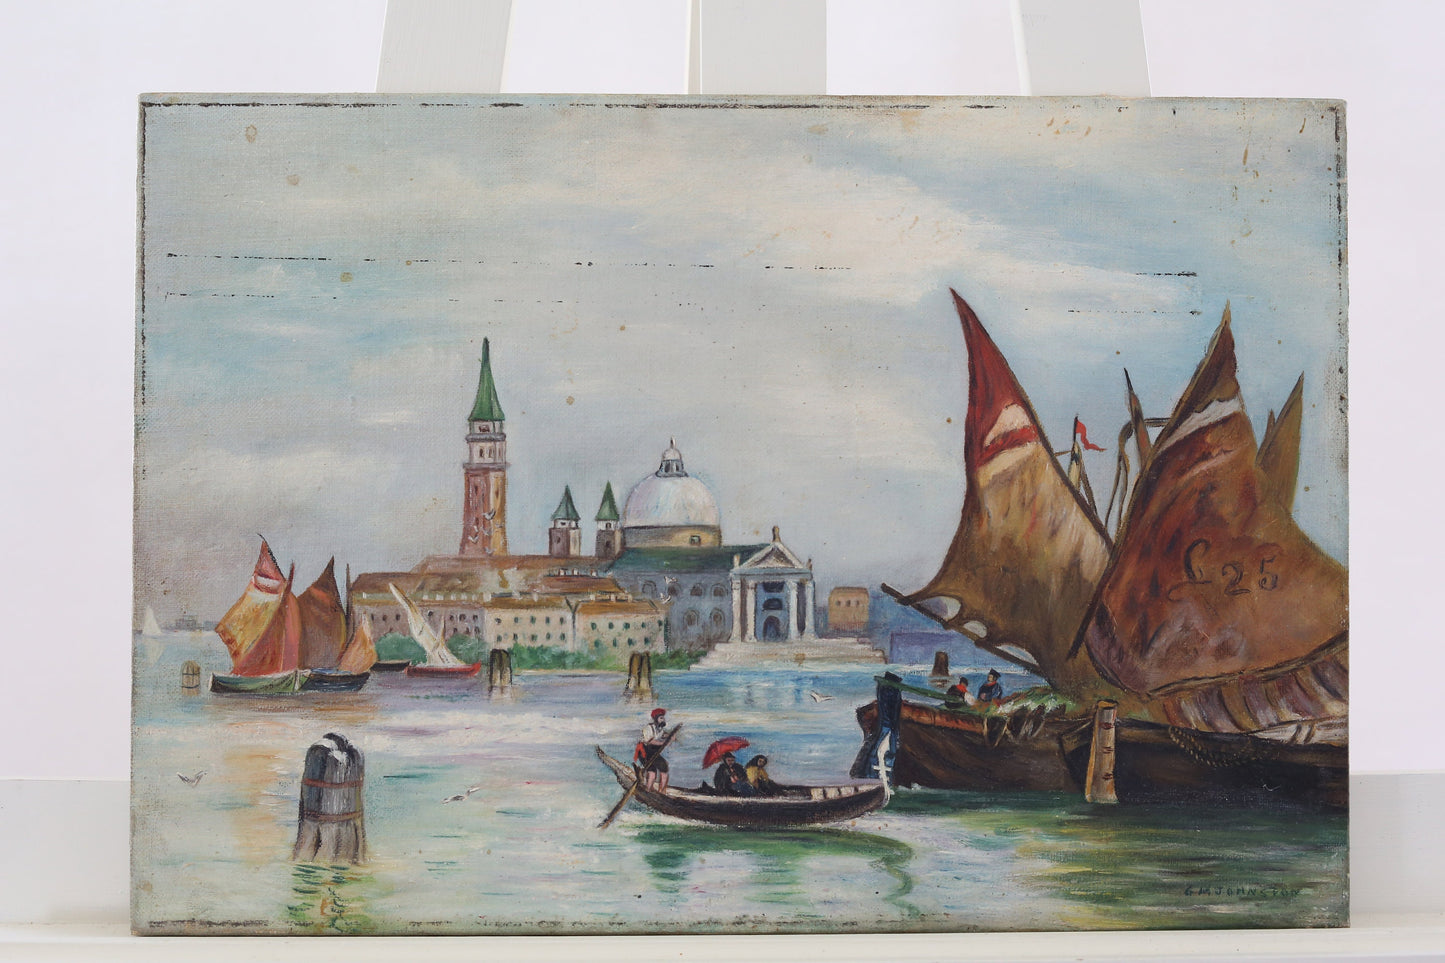 Painting on Canvas Venice Oil on Canvas ca 1900-1910 Signed GM Johnston Original Harbor Nautical Italy Antique Grand Canal Gondolas